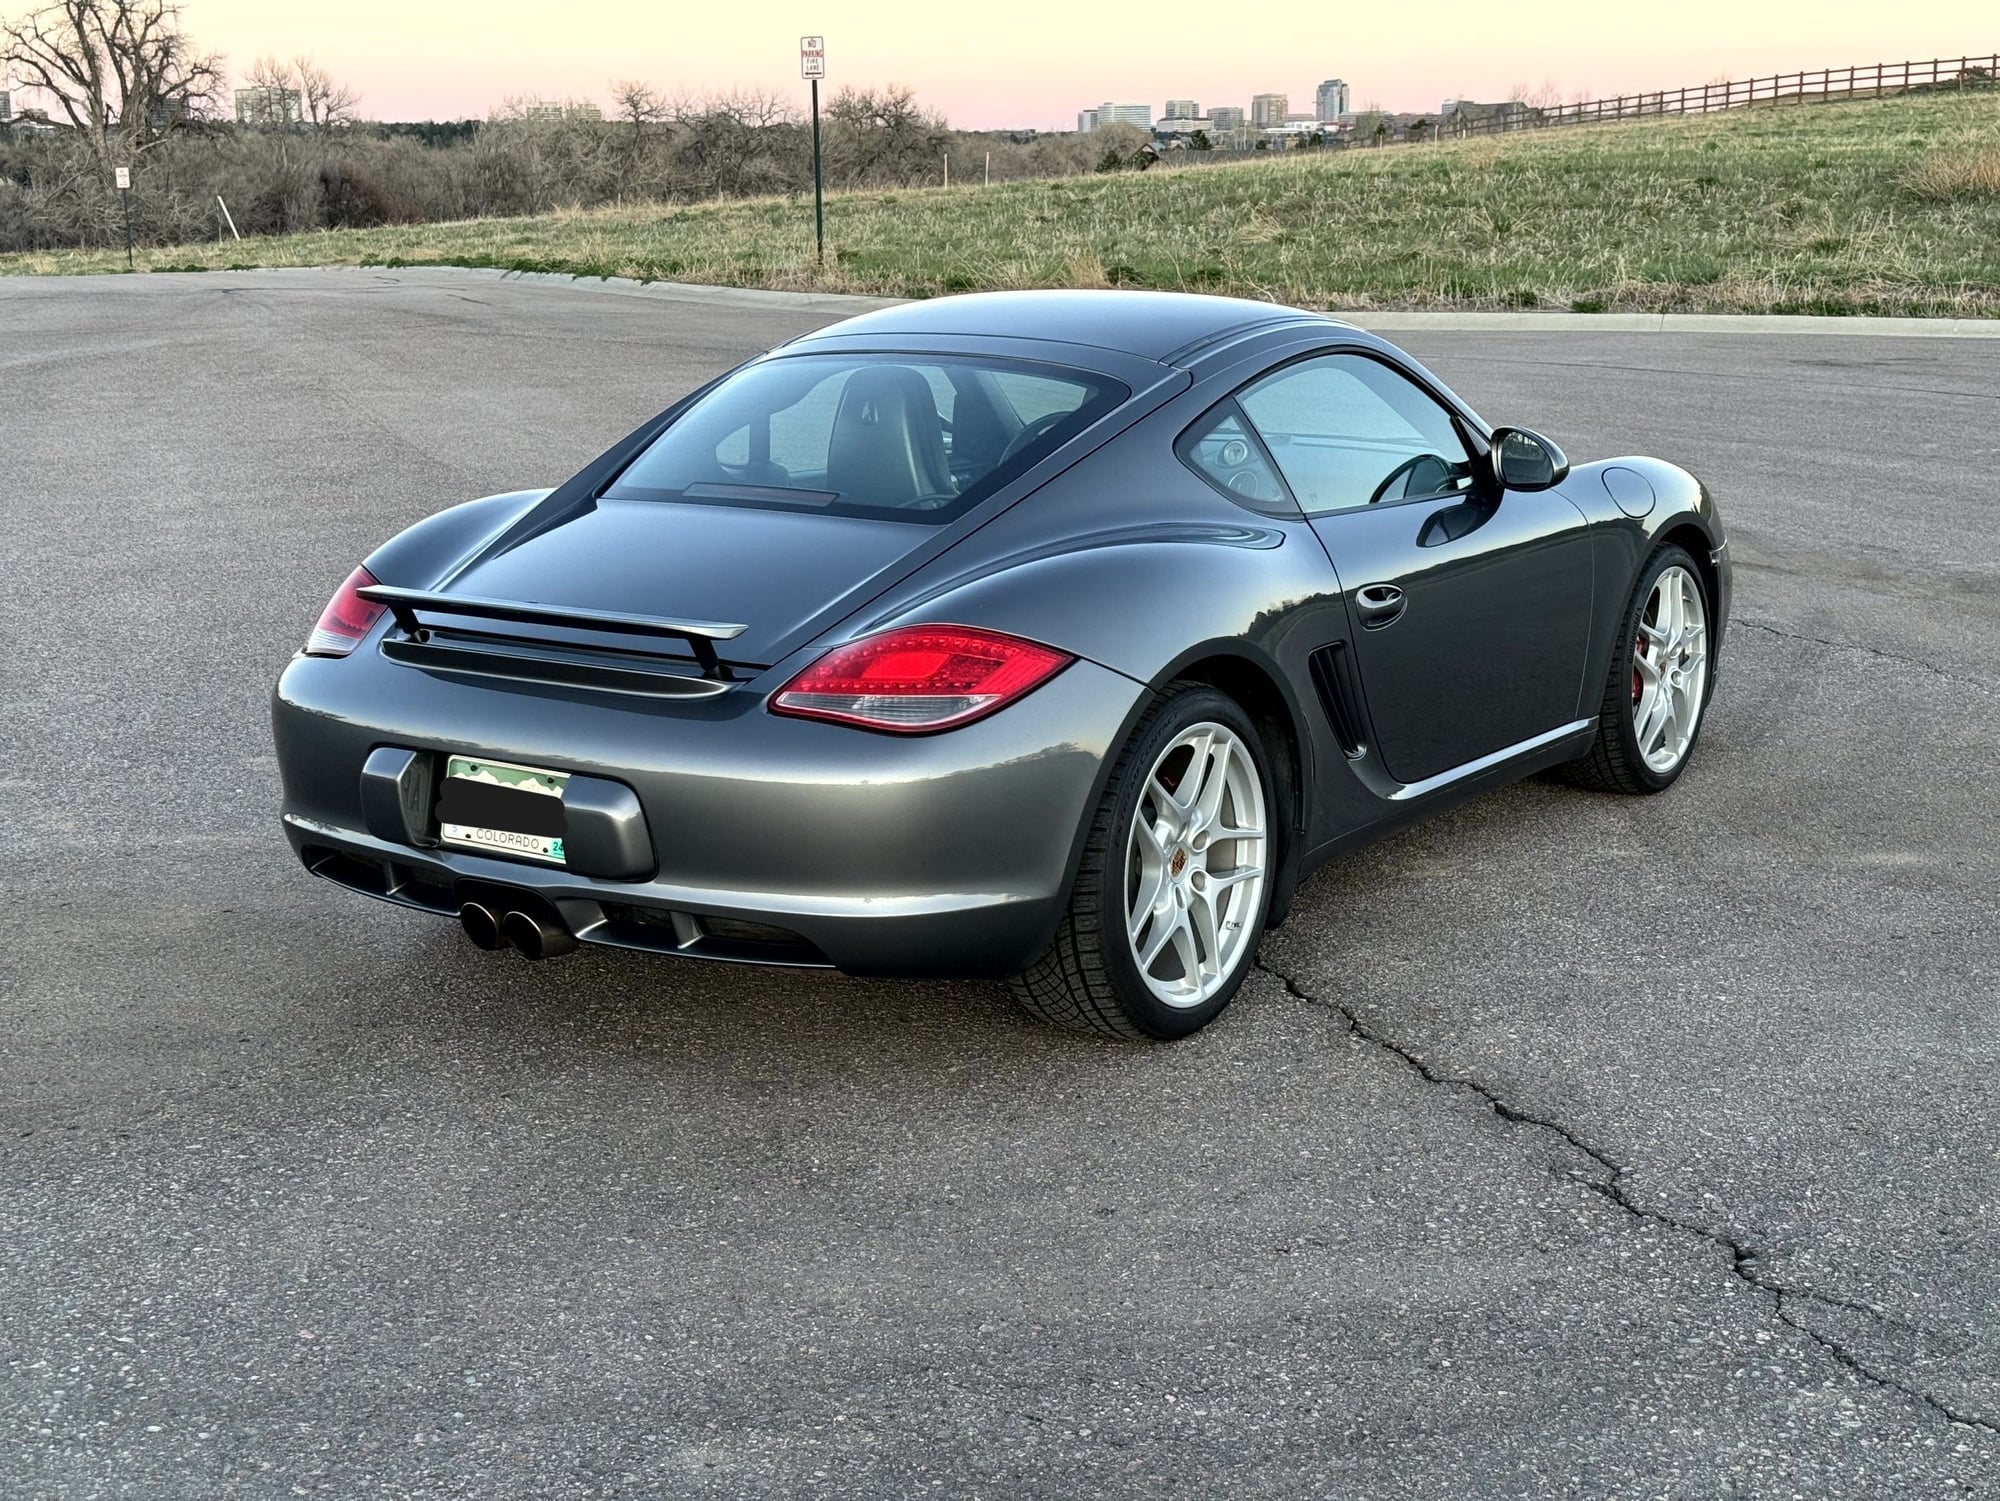 2009 Porsche Cayman - 2009 Porsche Cayman S (987.2) 6 Speed Manual - Used - VIN WP0AB29819U780700 - 71,600 Miles - 6 cyl - 2WD - Manual - Coupe - Gray - Denver, CO 80113, United States